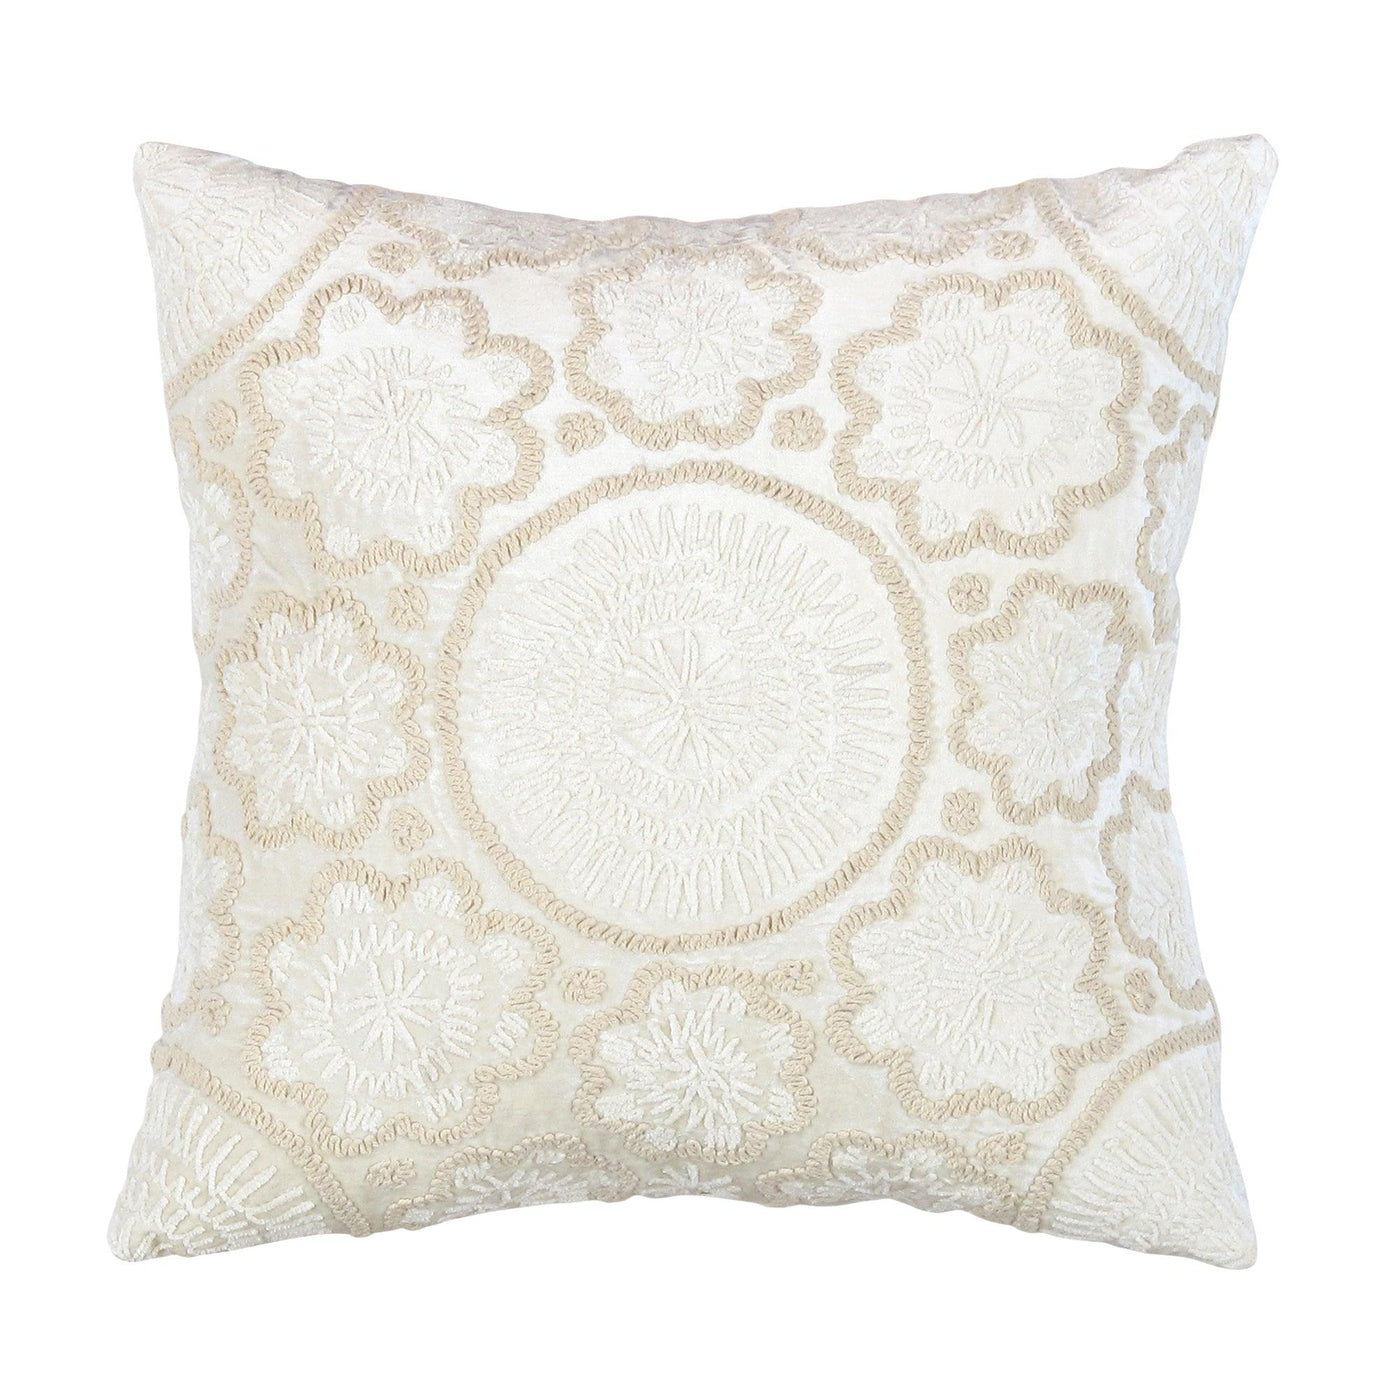 Canvello Naples Embroidered Pillow, Ivory/Beige